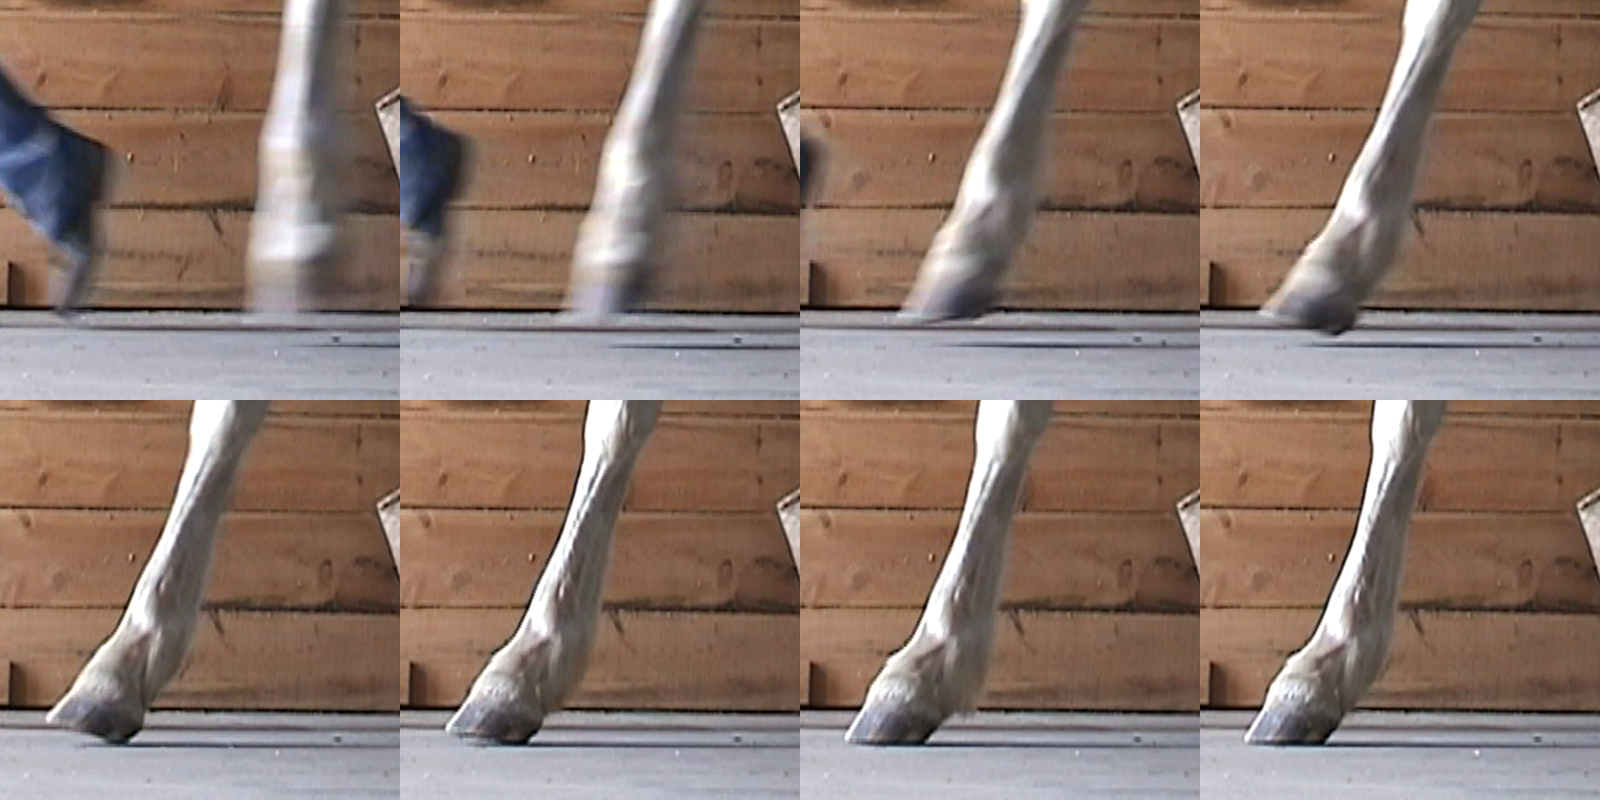 photo sequence of a heel-first landing on a bare hoof